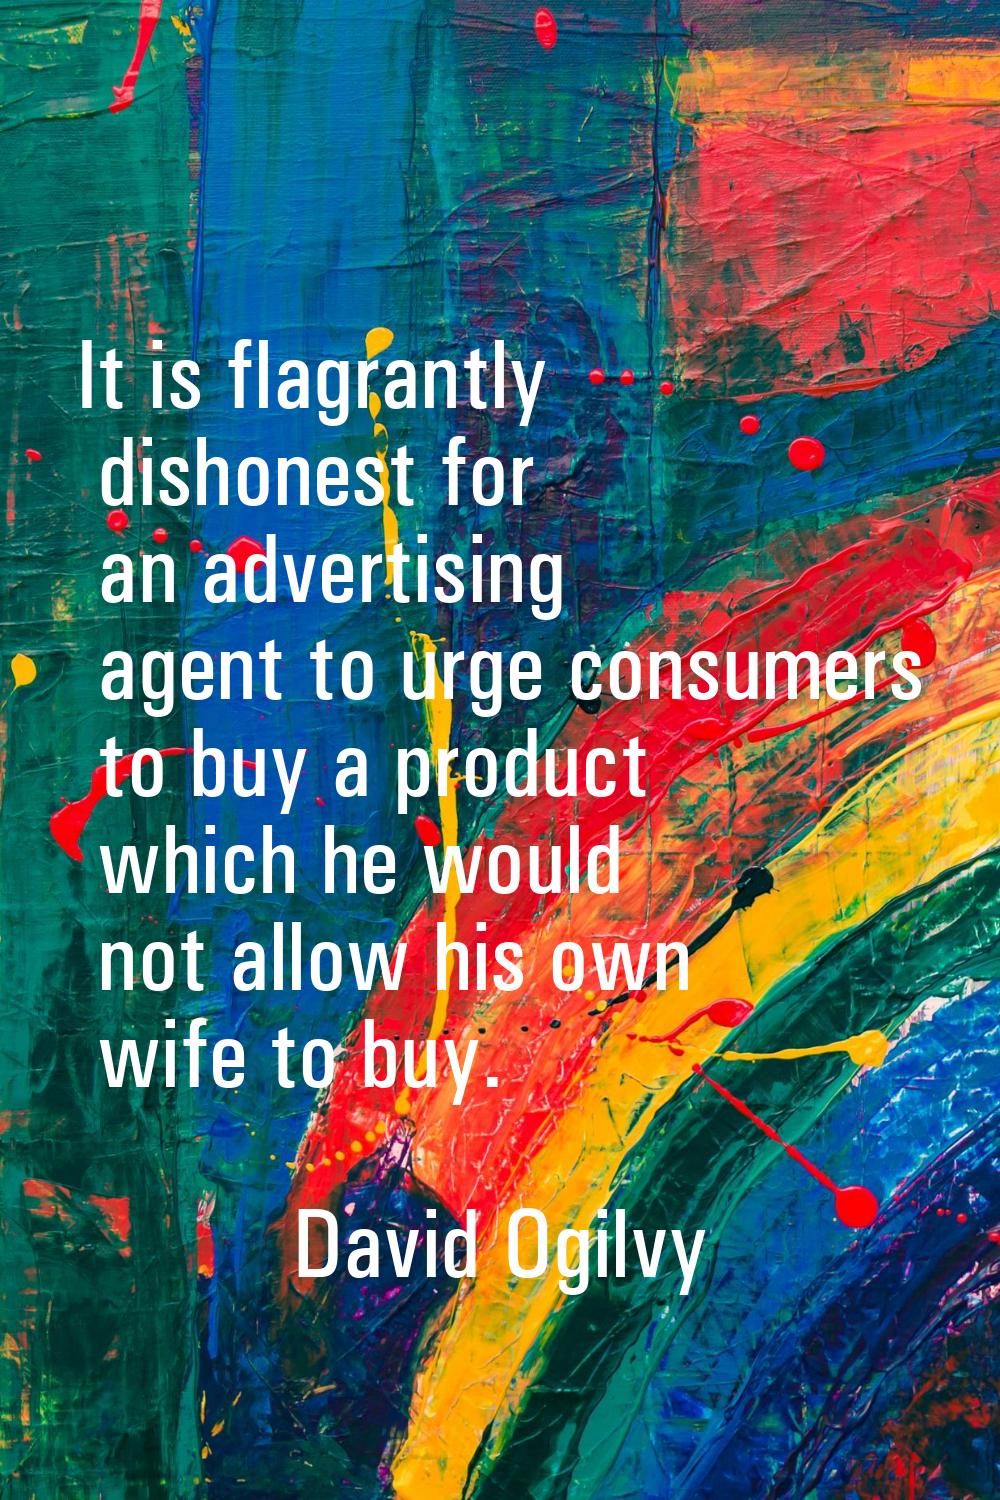 It is flagrantly dishonest for an advertising agent to urge consumers to buy a product which he wou